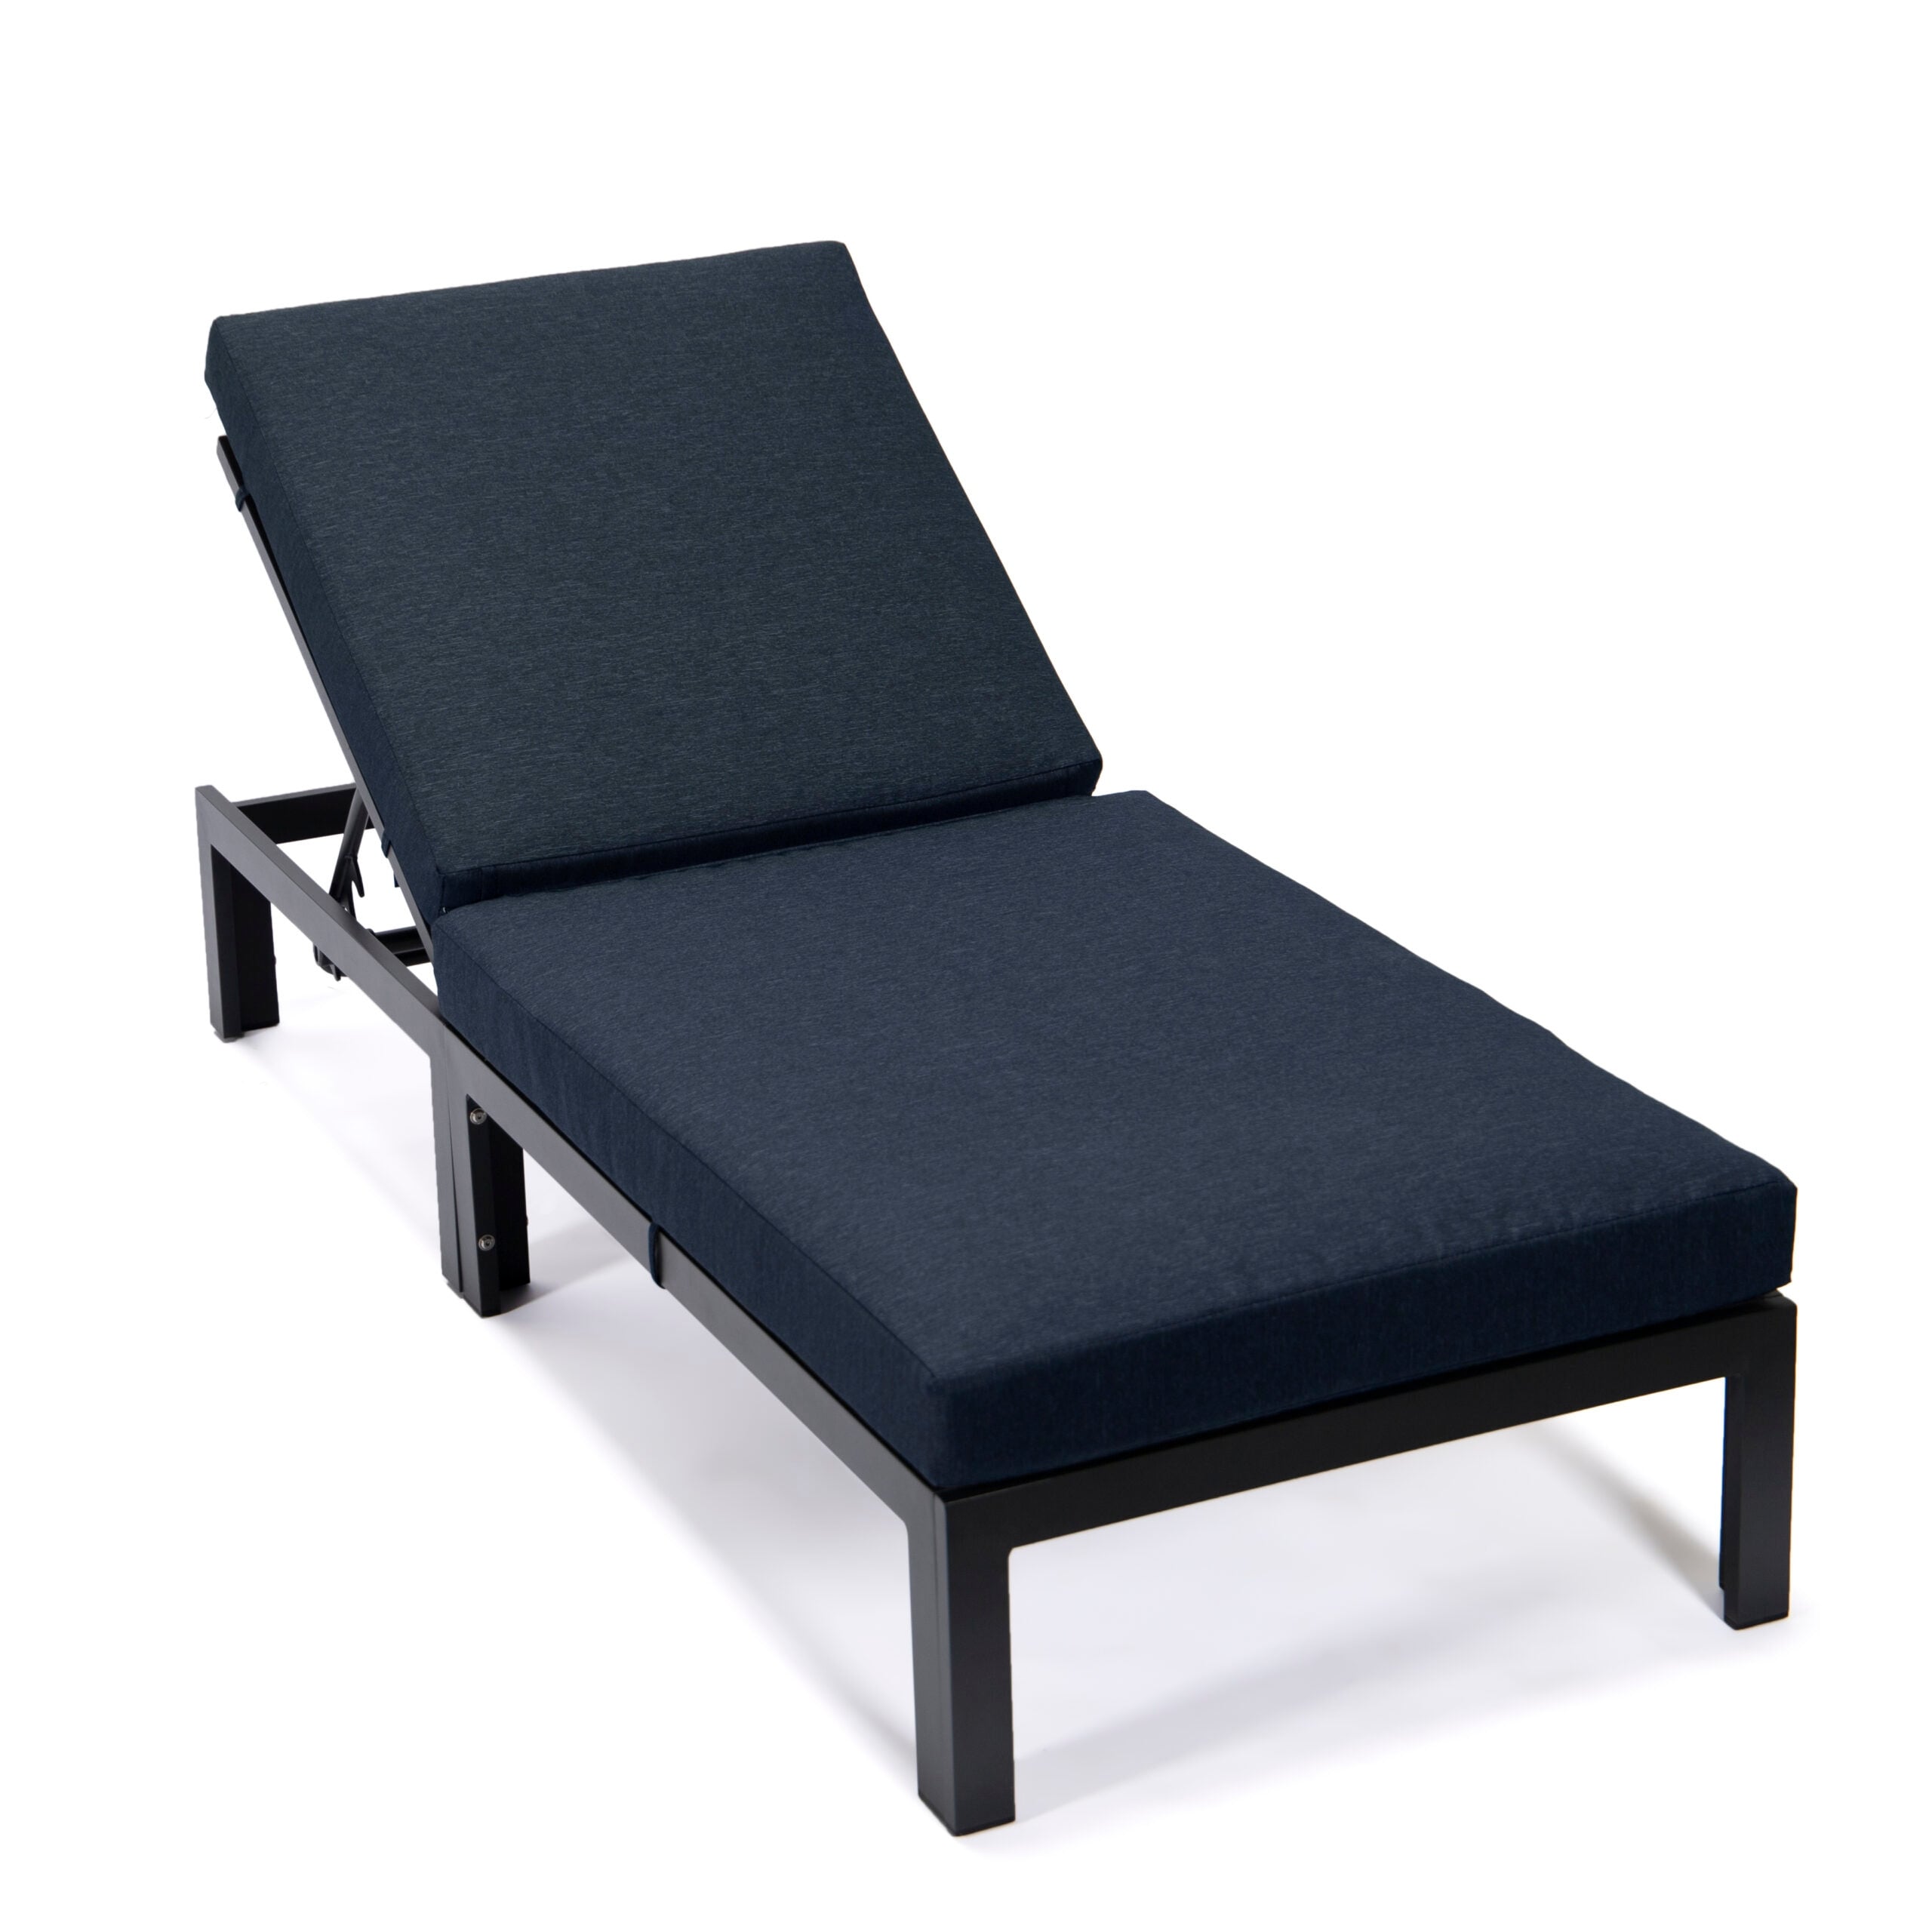 Leisuremod Chelsea Aluminum Patio Chaise Lounge Chair With Cushions